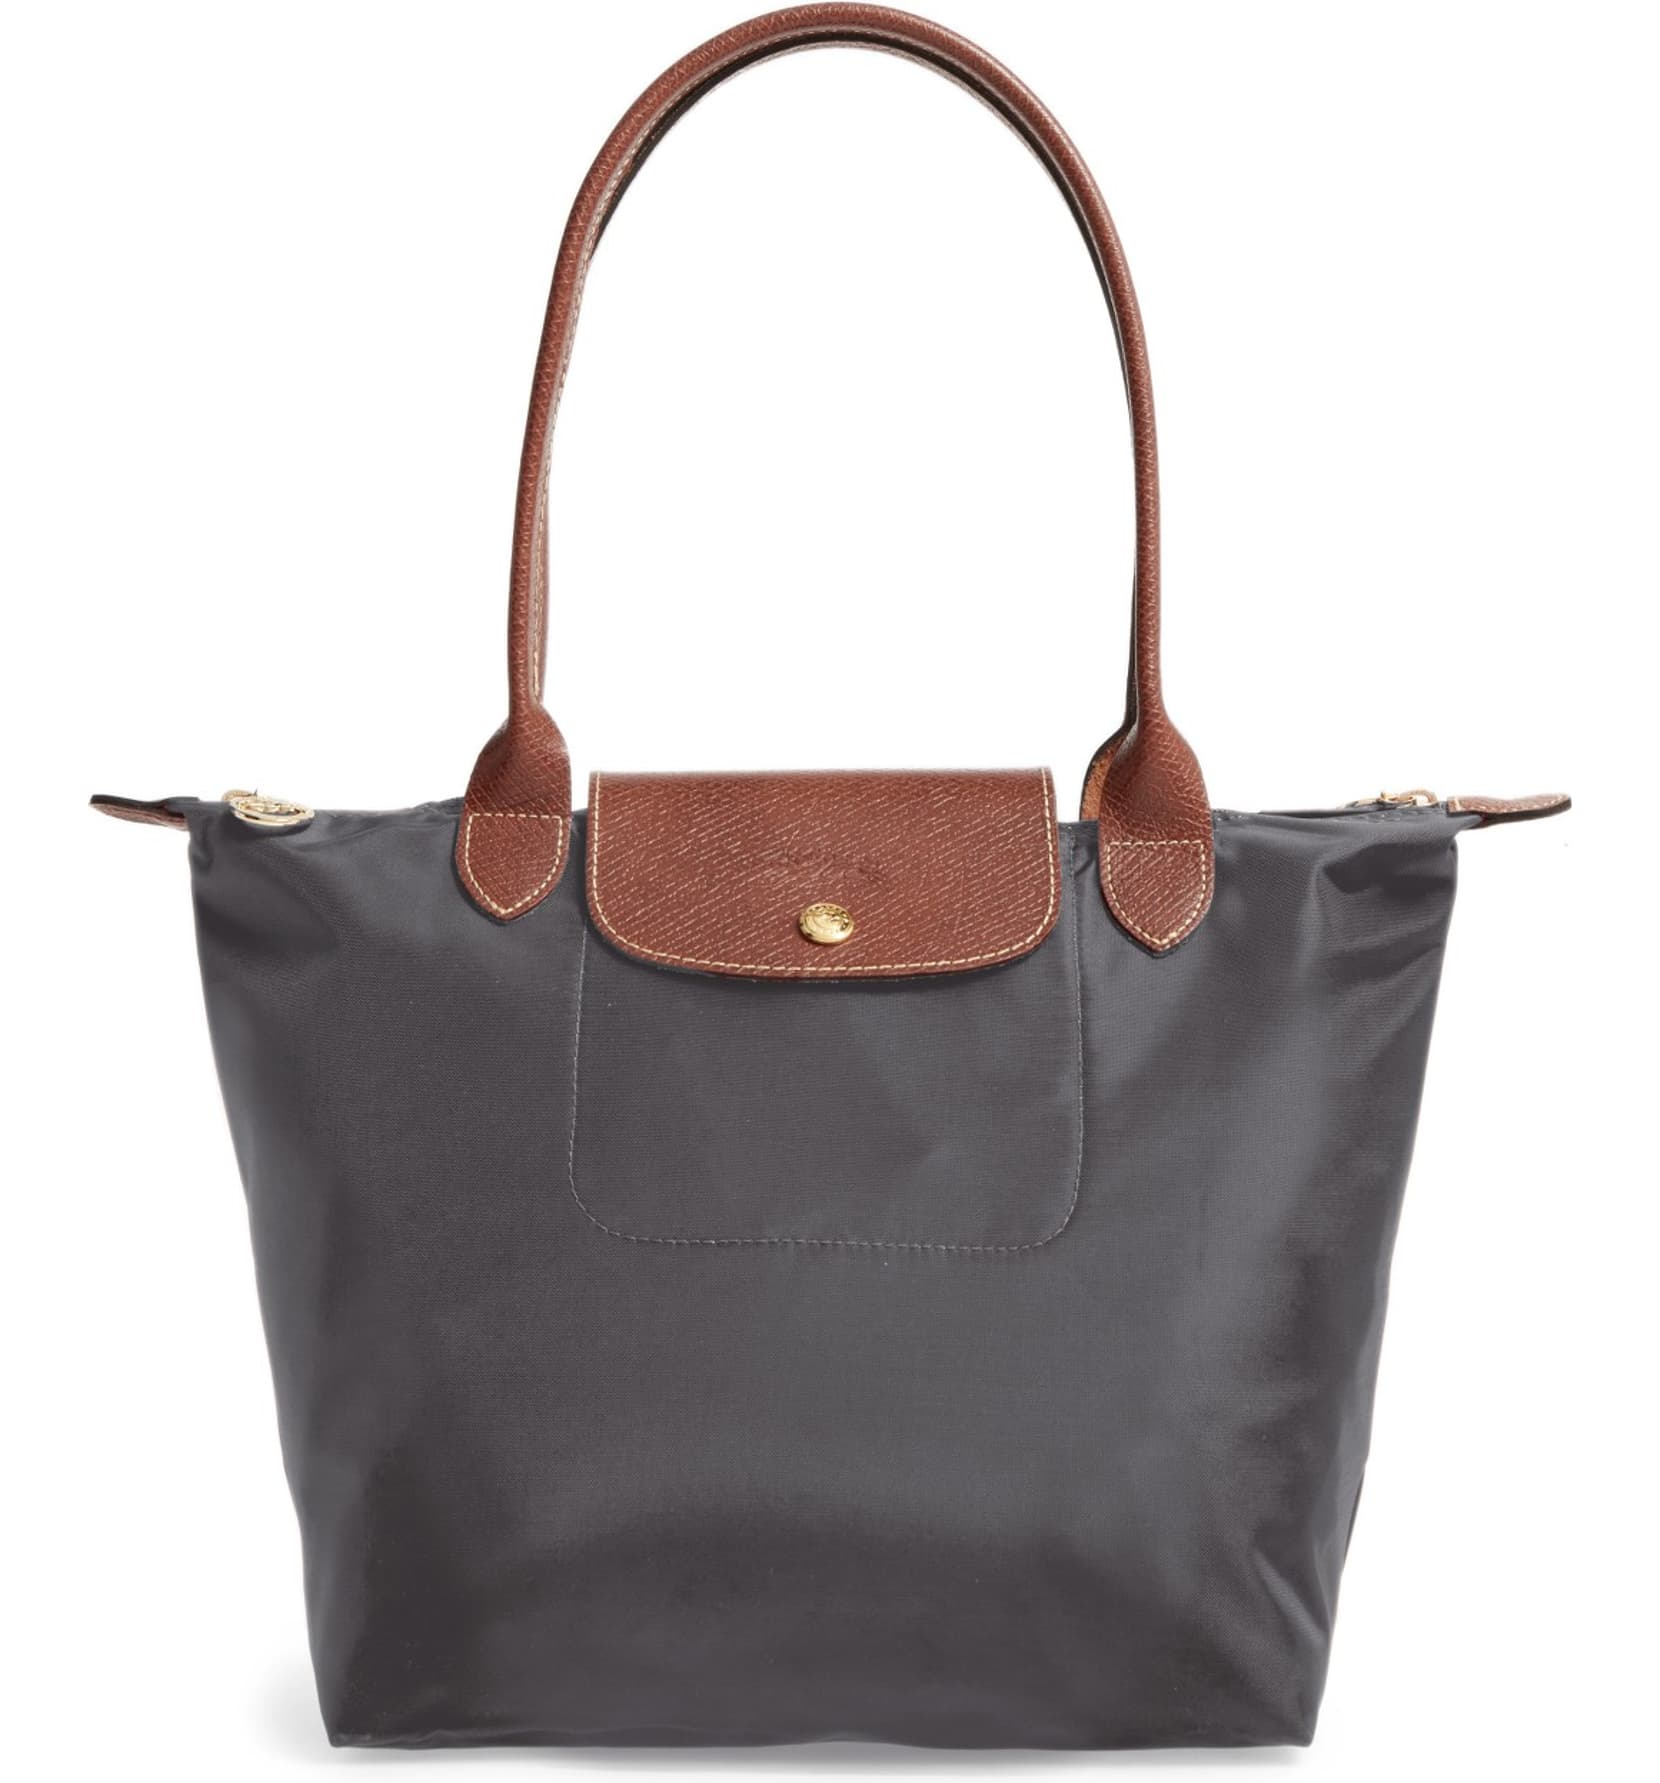 why longchamp bags are popular